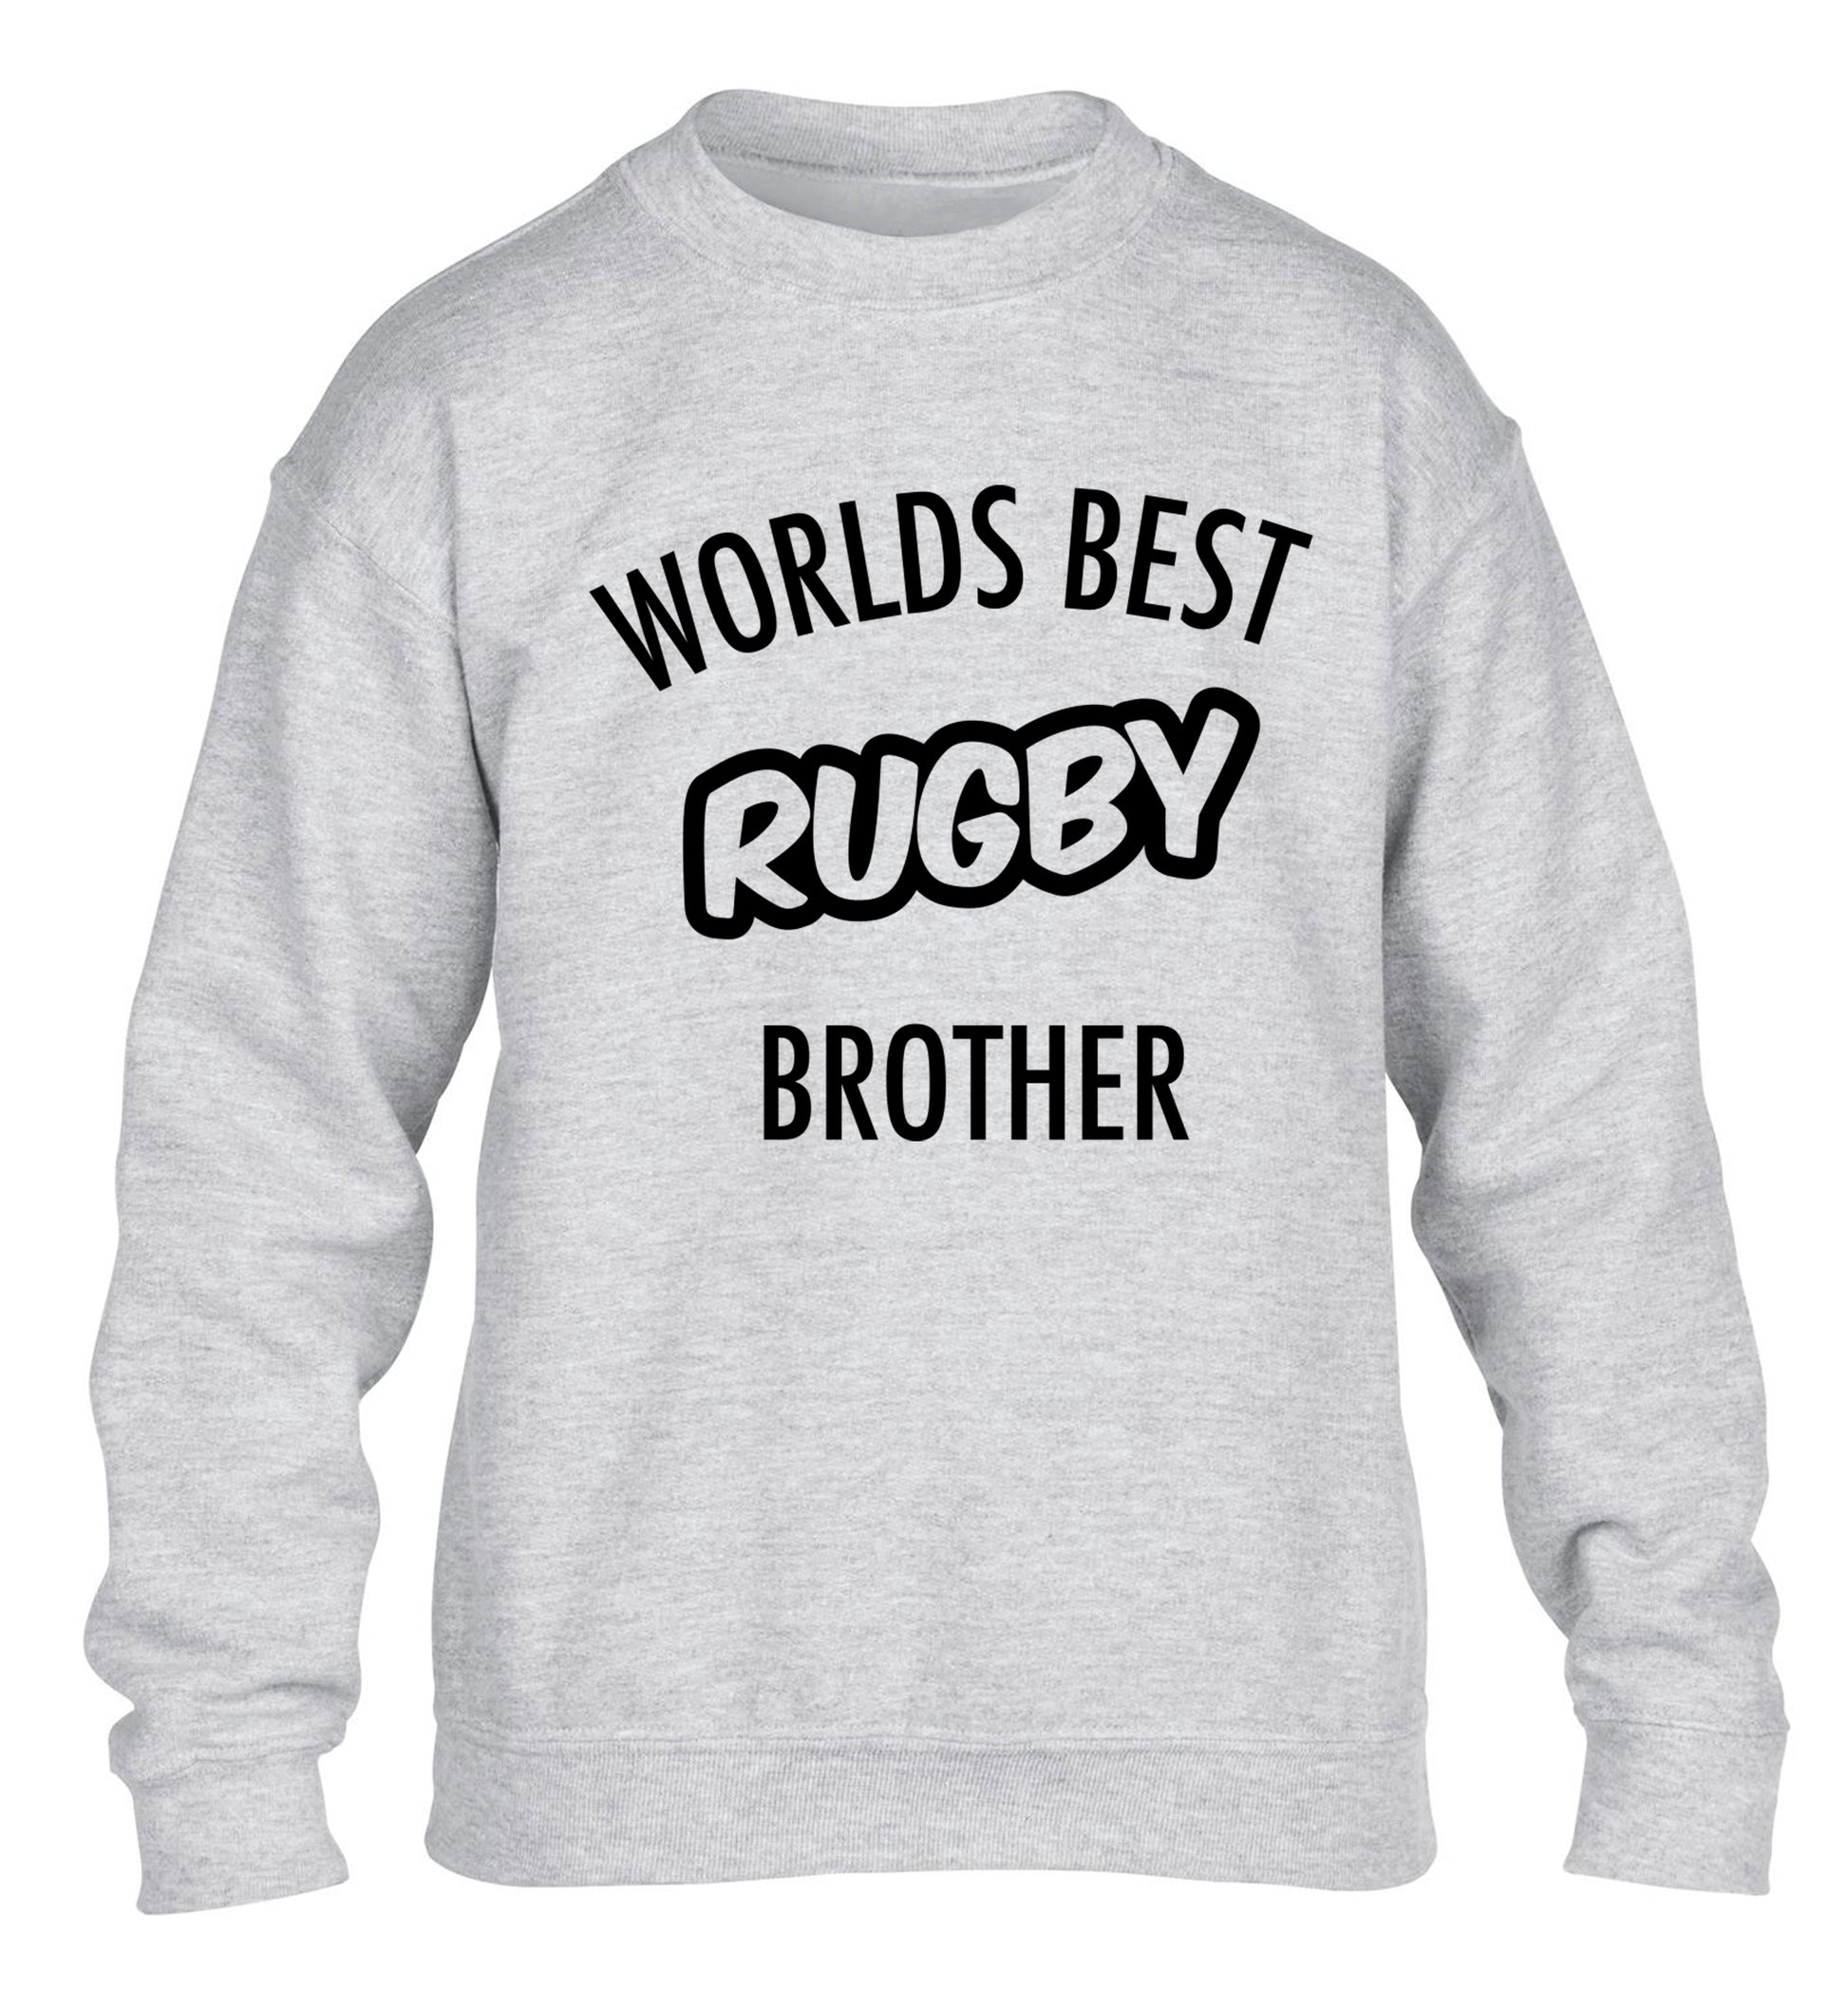 Worlds best rugby brother children's grey sweater 12-13 Years